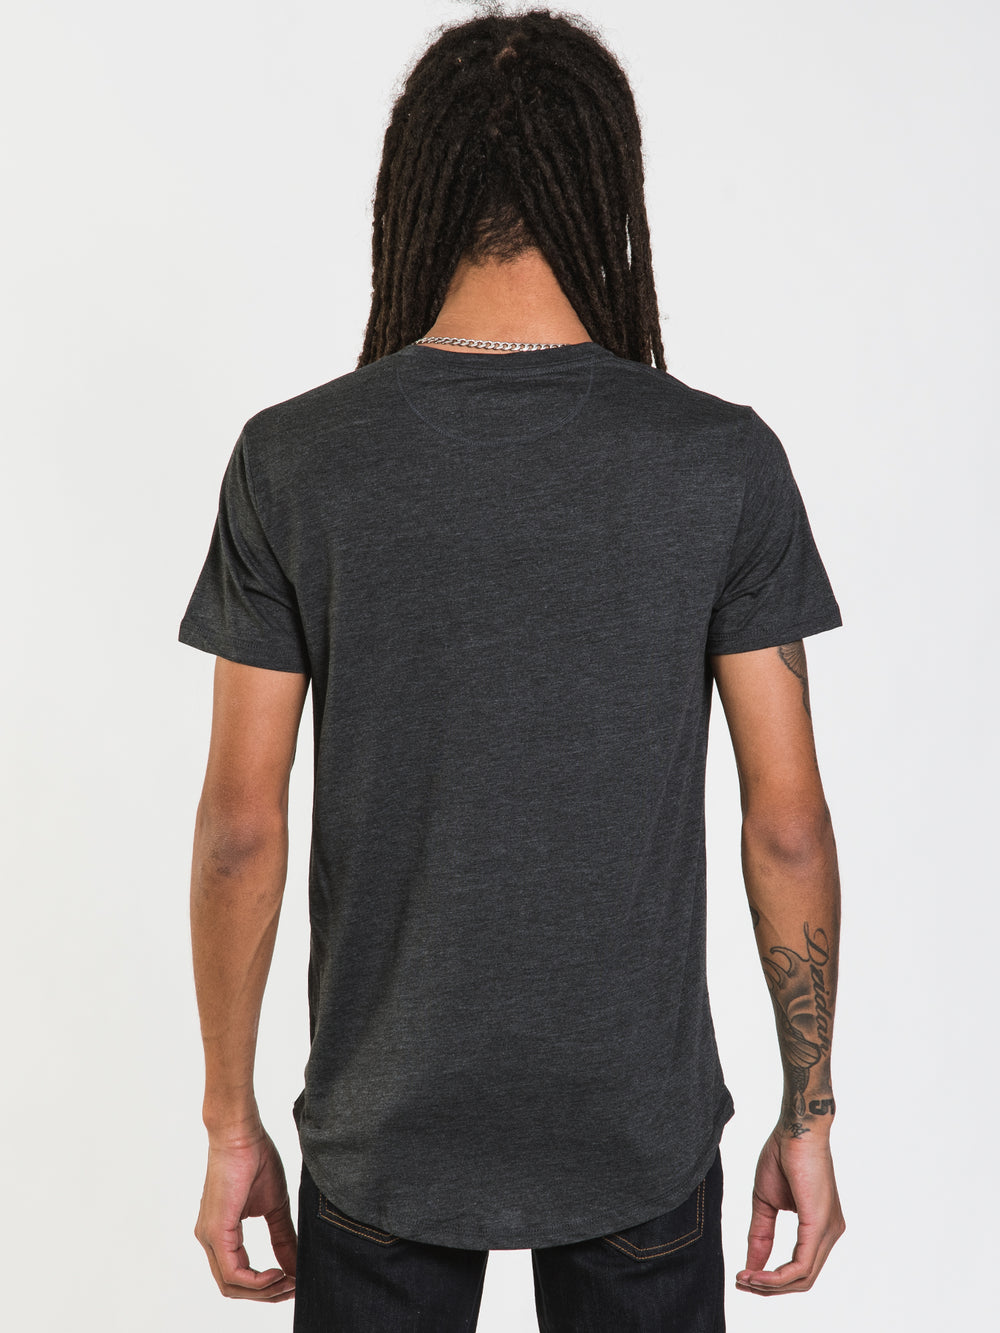 TENTREE EMBROIDERED POCKET T-SHIRT - CLEARANCE